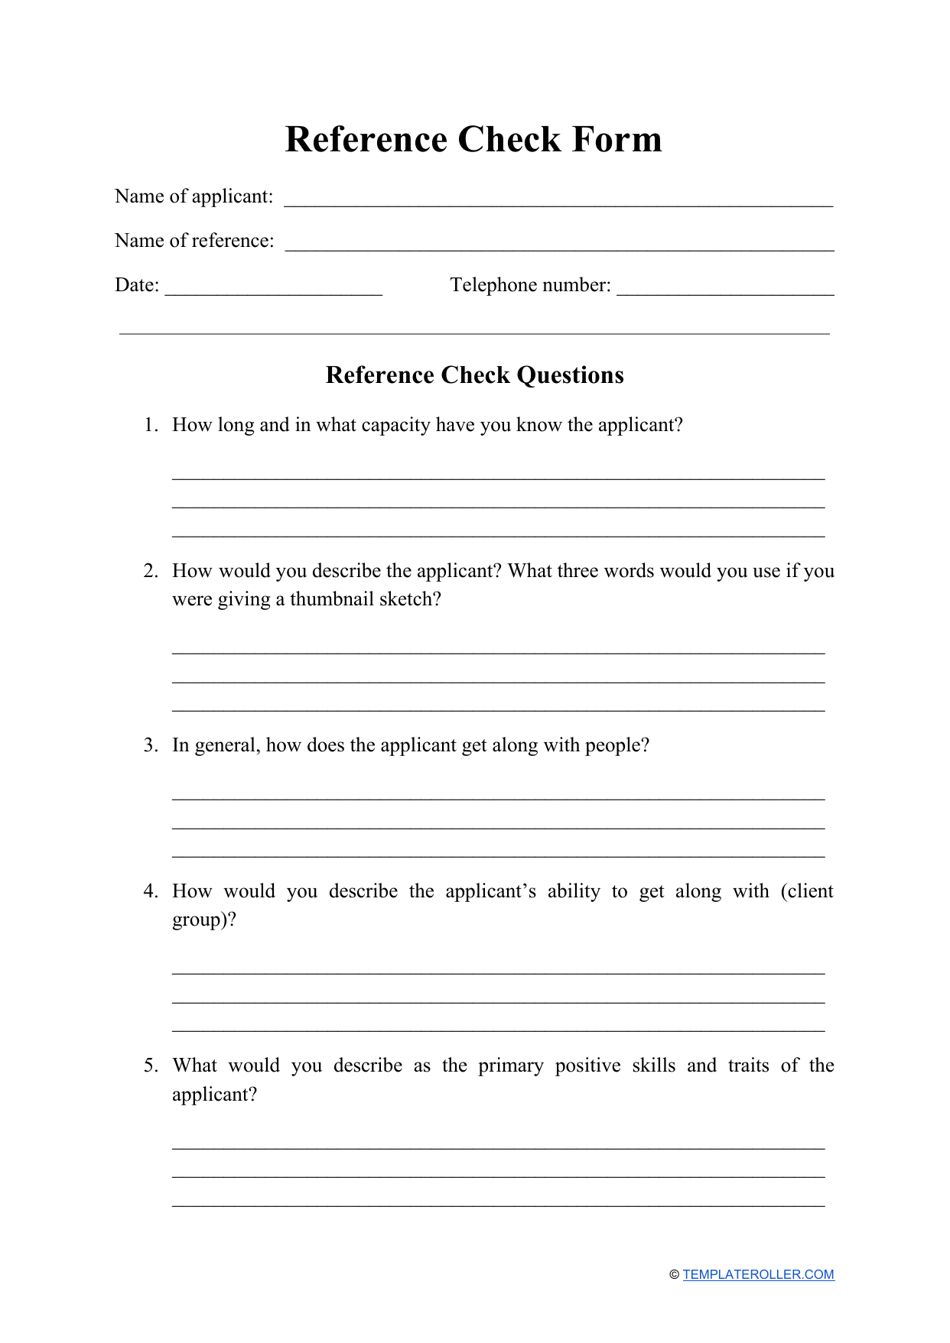 Reference Check Form Fill Out Sign Online and Download PDF